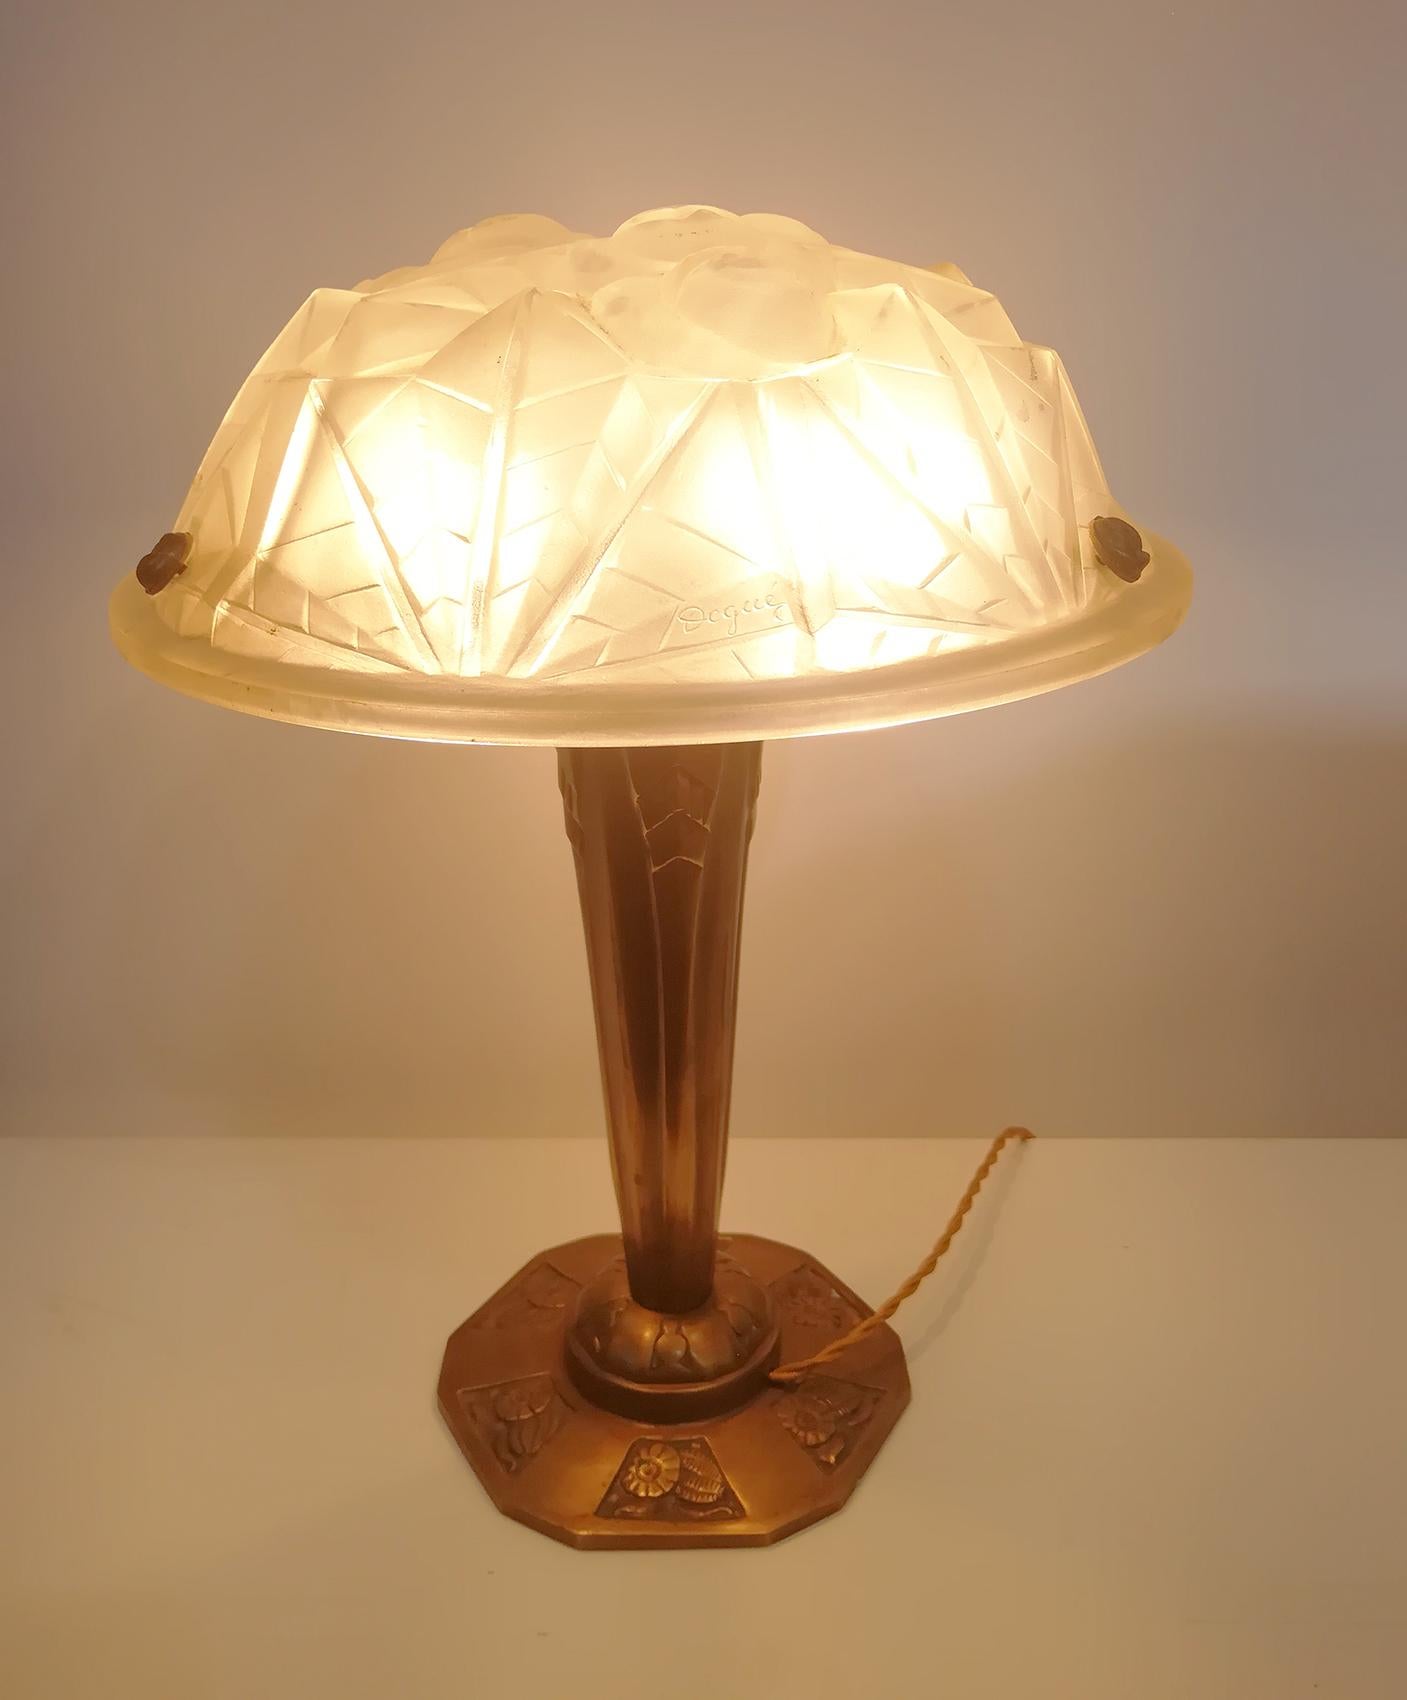 Frosted Pair of French Art Deco Table Lamp Signed “Degué” For Sale